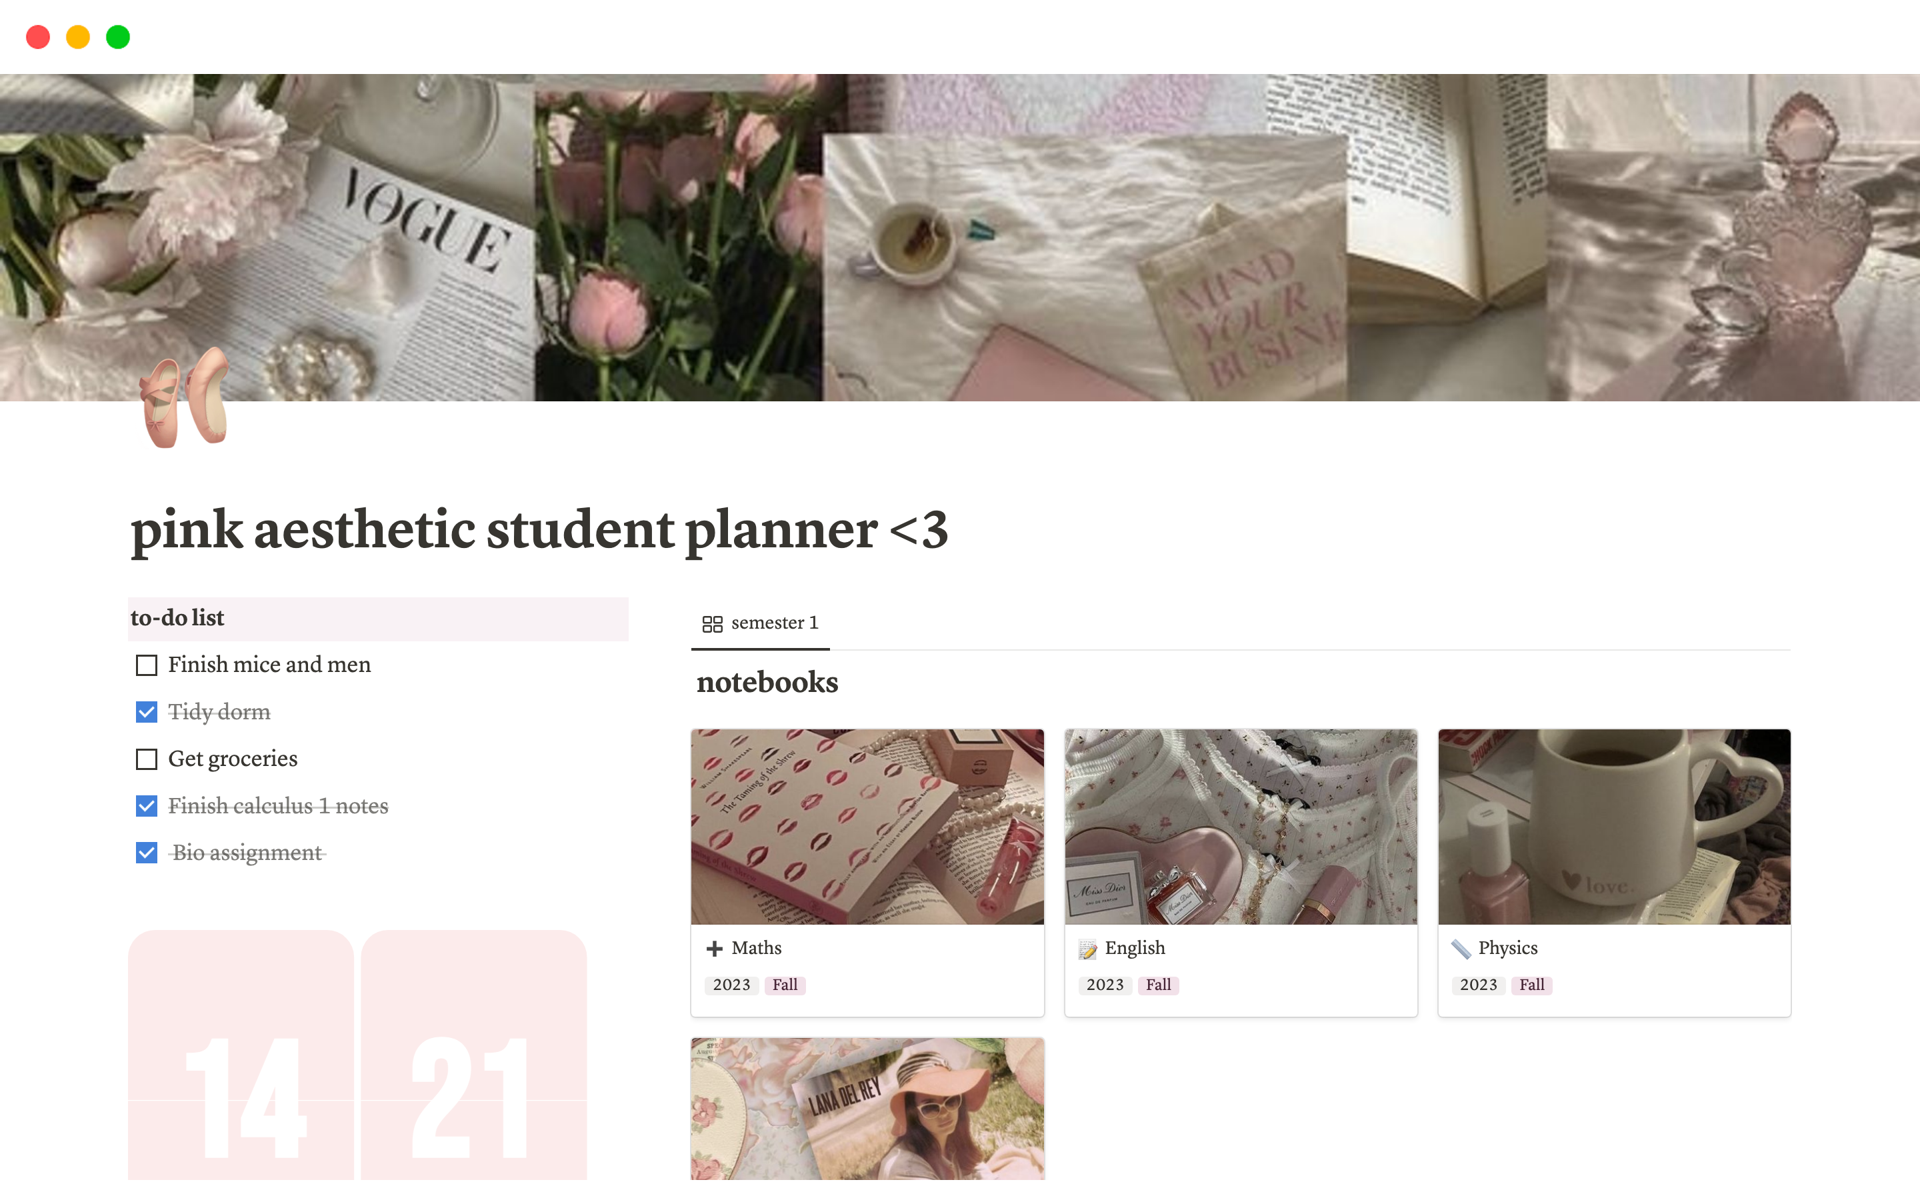 Organise your assignments, projects, clubs, and to-dos with an aesthetic, pink themed Notion template for students.